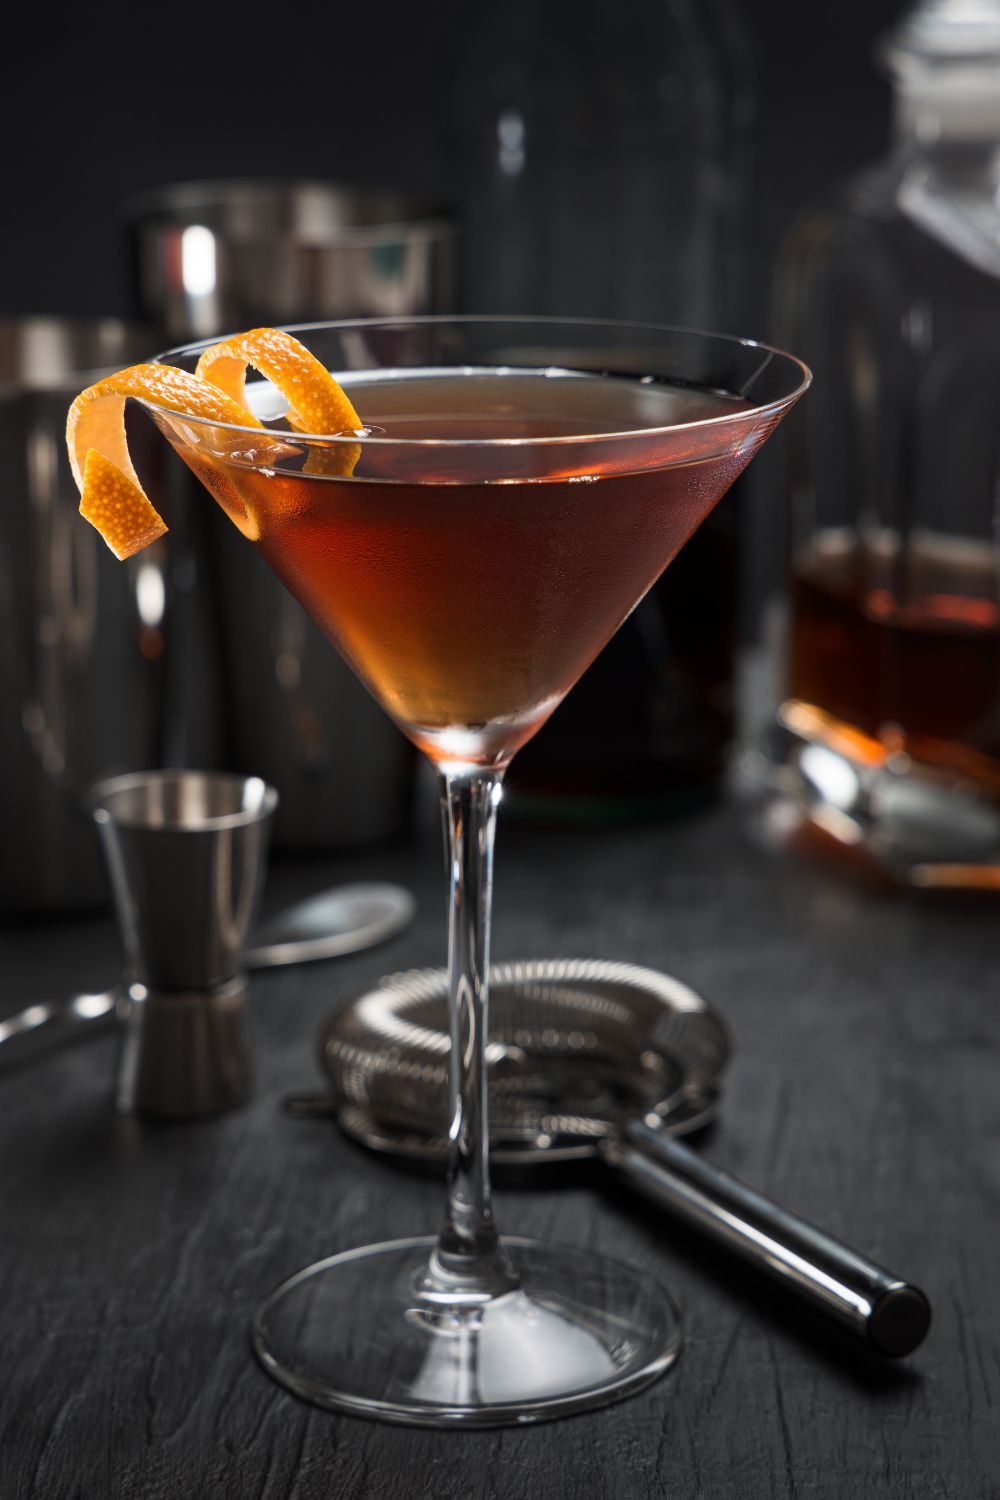 A Pimm's cup cocktail in a martini glass with an orange twist